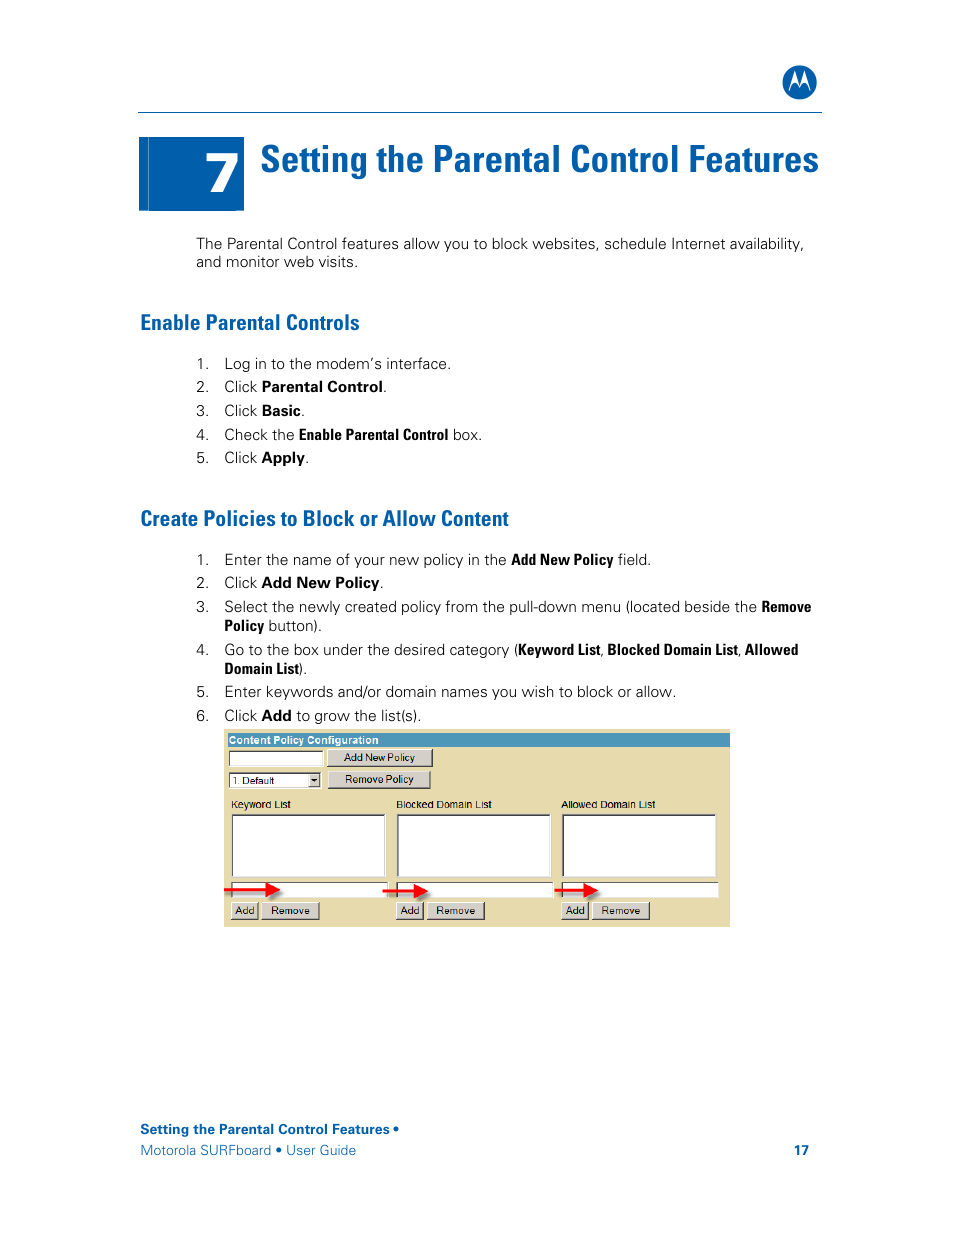 Enable parental controls, Create policies to block or allow content, Setting the parental control features | Motorola SURFboard SBG6580 Series User Manual | Page 25 / 36